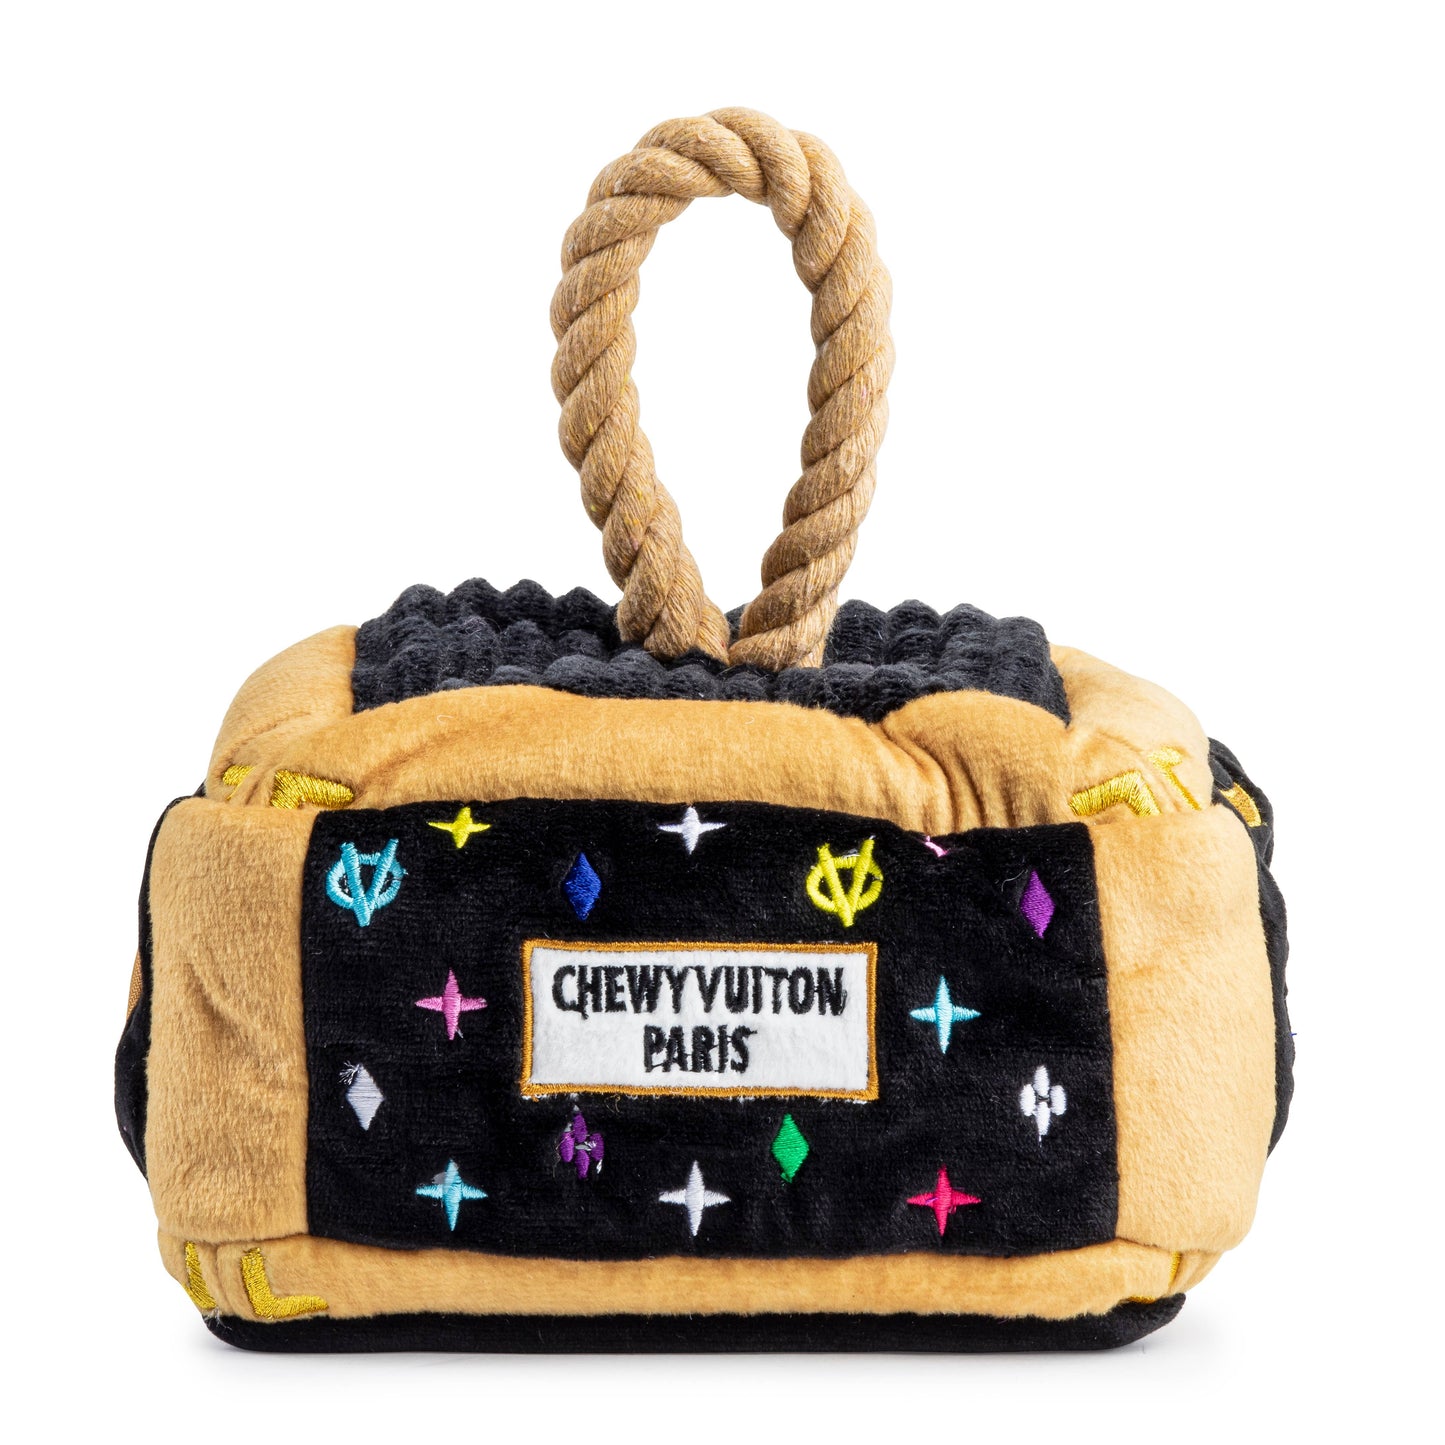 Load image into Gallery viewer, Haute Diggity Dog - Black Monogram Chewy Vuiton Trunk Dog Toy  Image
